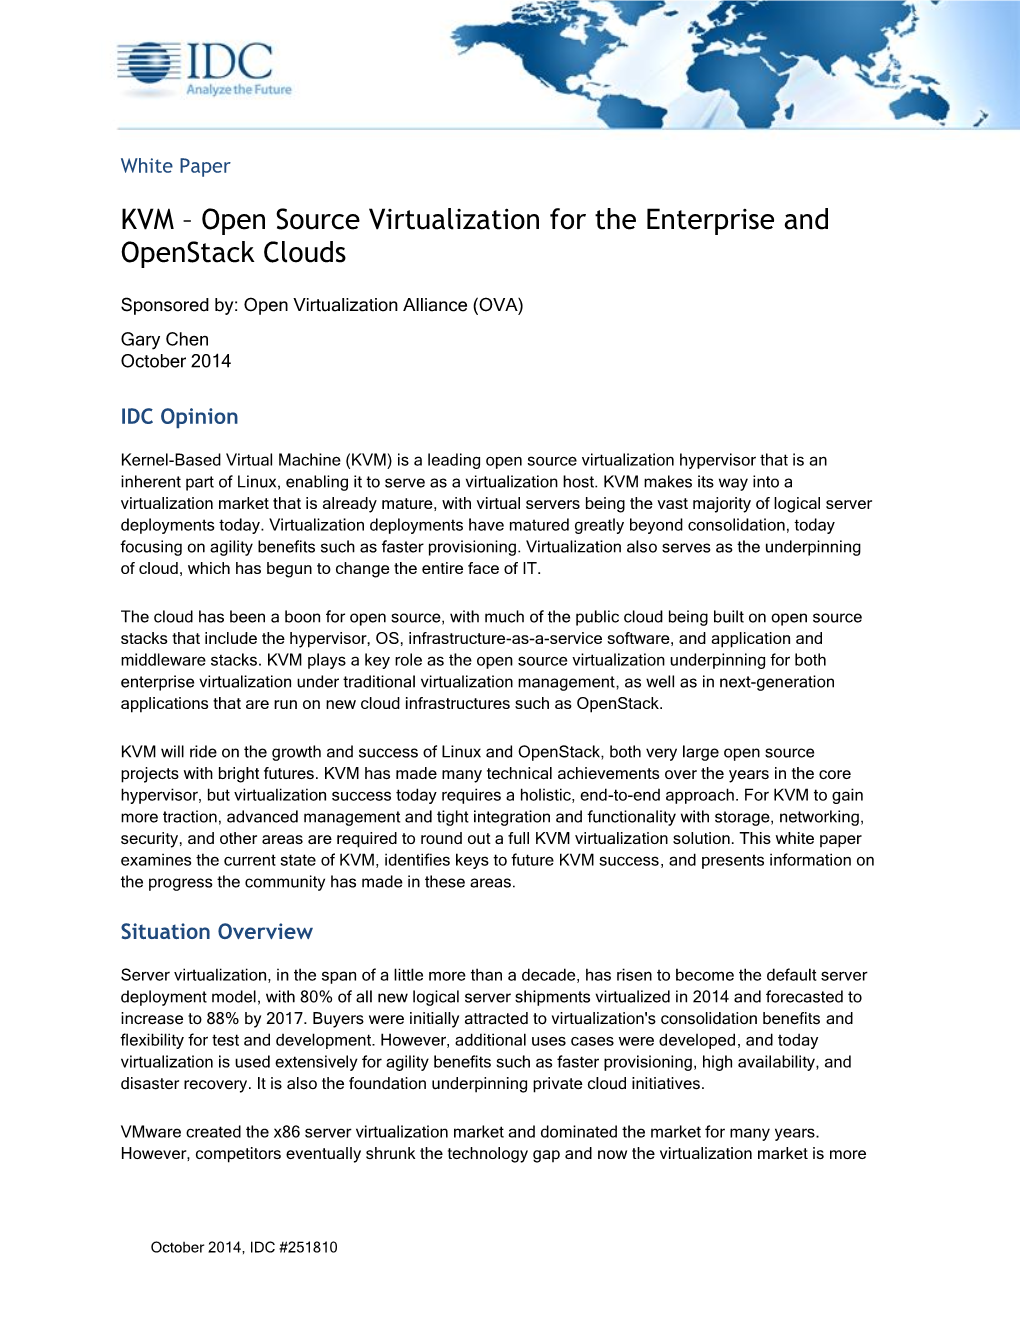 KVM – Open Source Virtualization for the Enterprise and Openstack Clouds